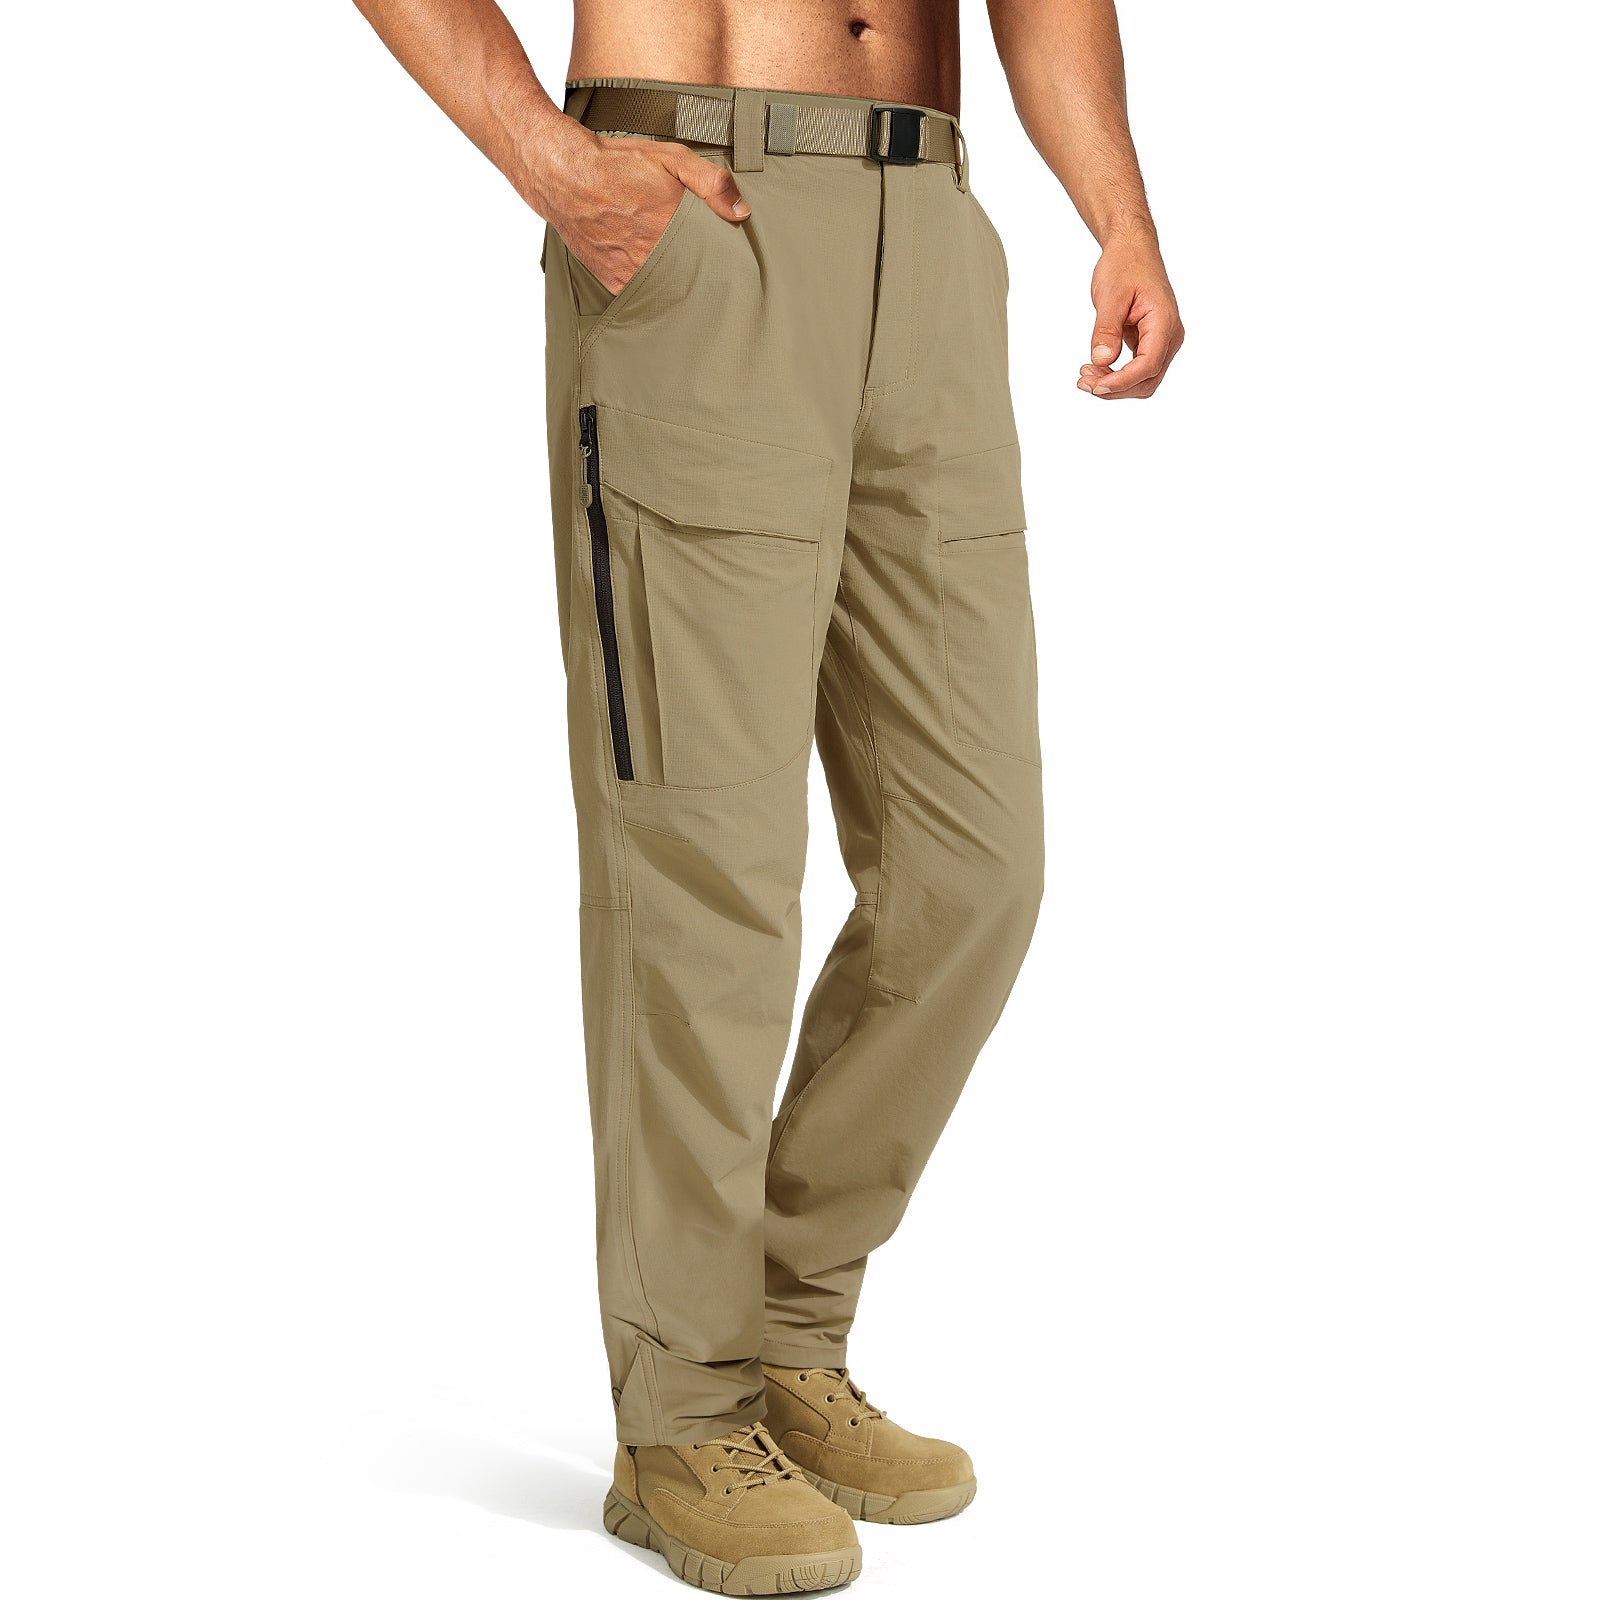  FREE SOLDIER Mens Cargo Pants Lightweight Work Pants for Men  Water Resistant Tactical Pants with Pockets for Hiking  Outdoor（Brown30Wx30L） : Clothing, Shoes & Jewelry